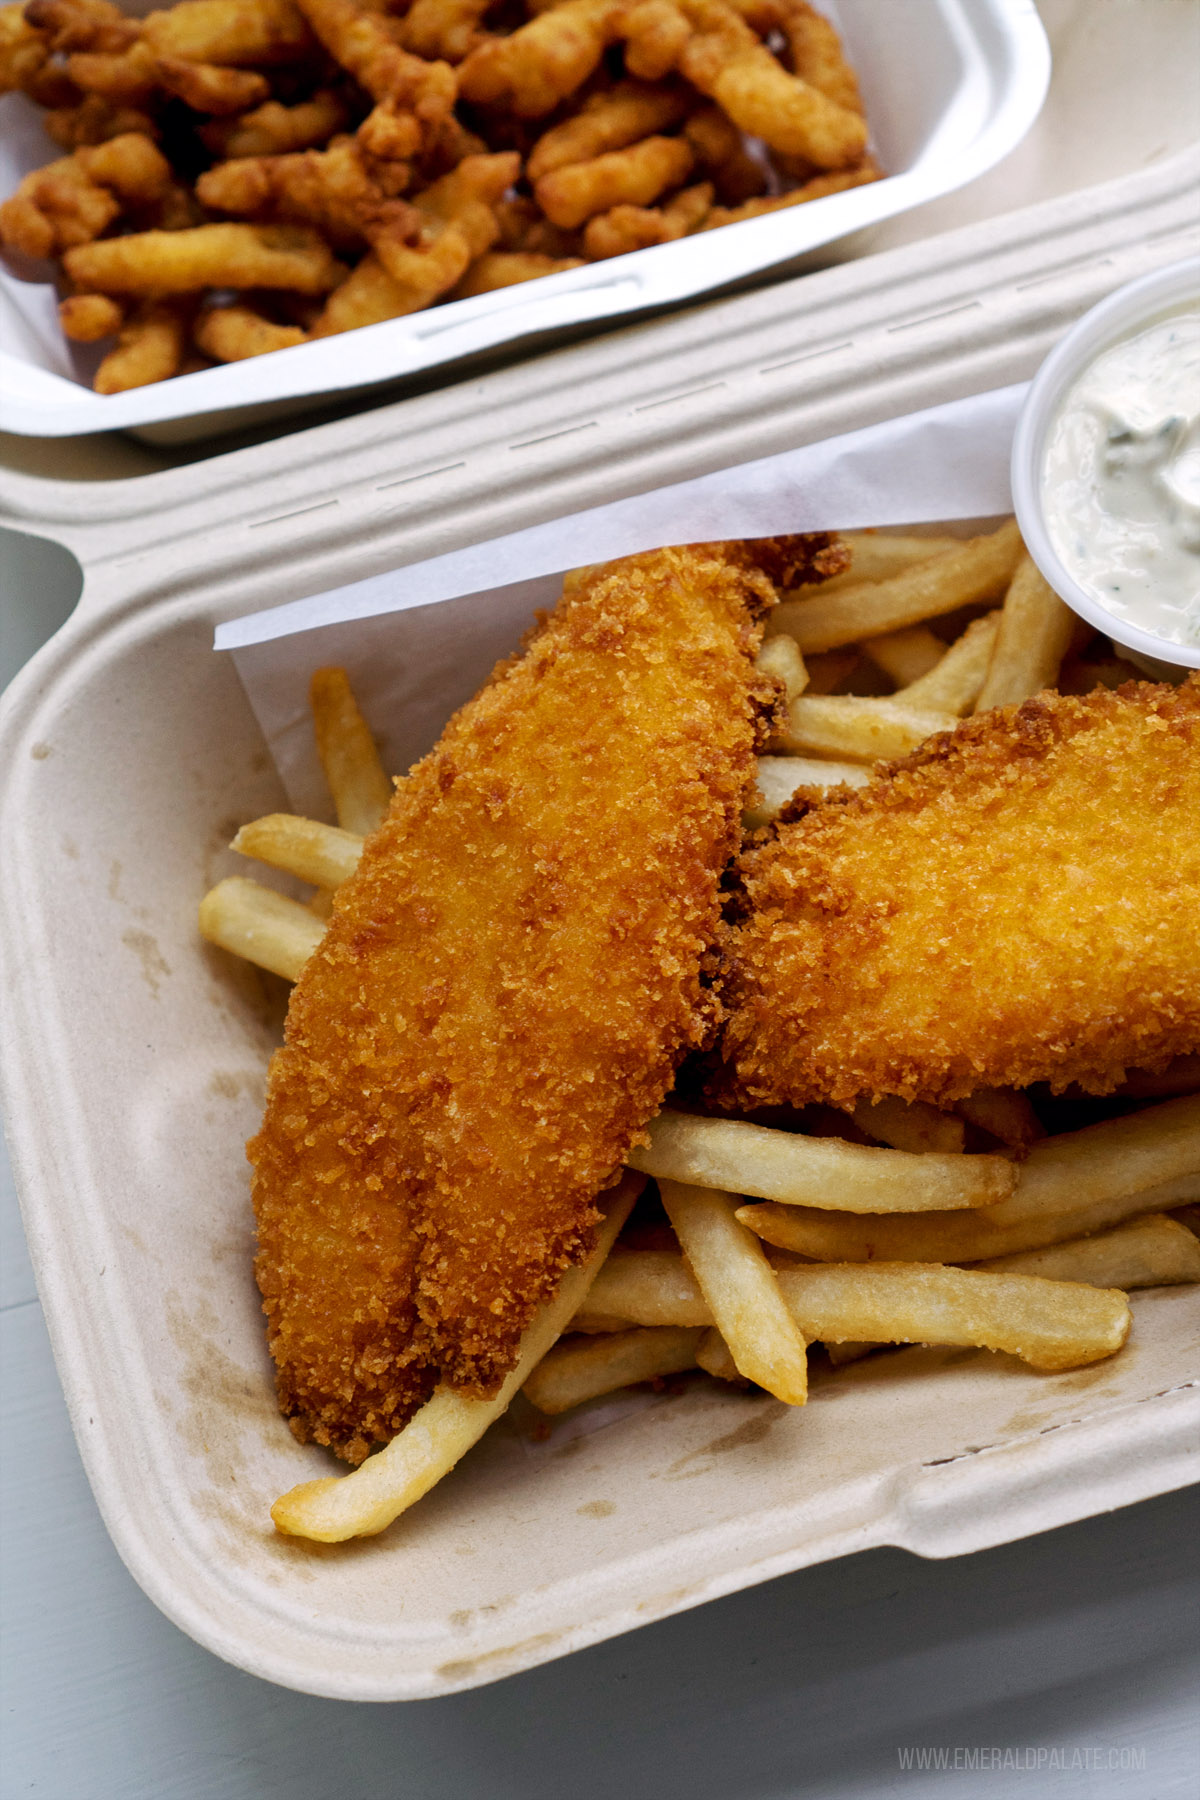 takeout containers of breaded fried cod and clam strips